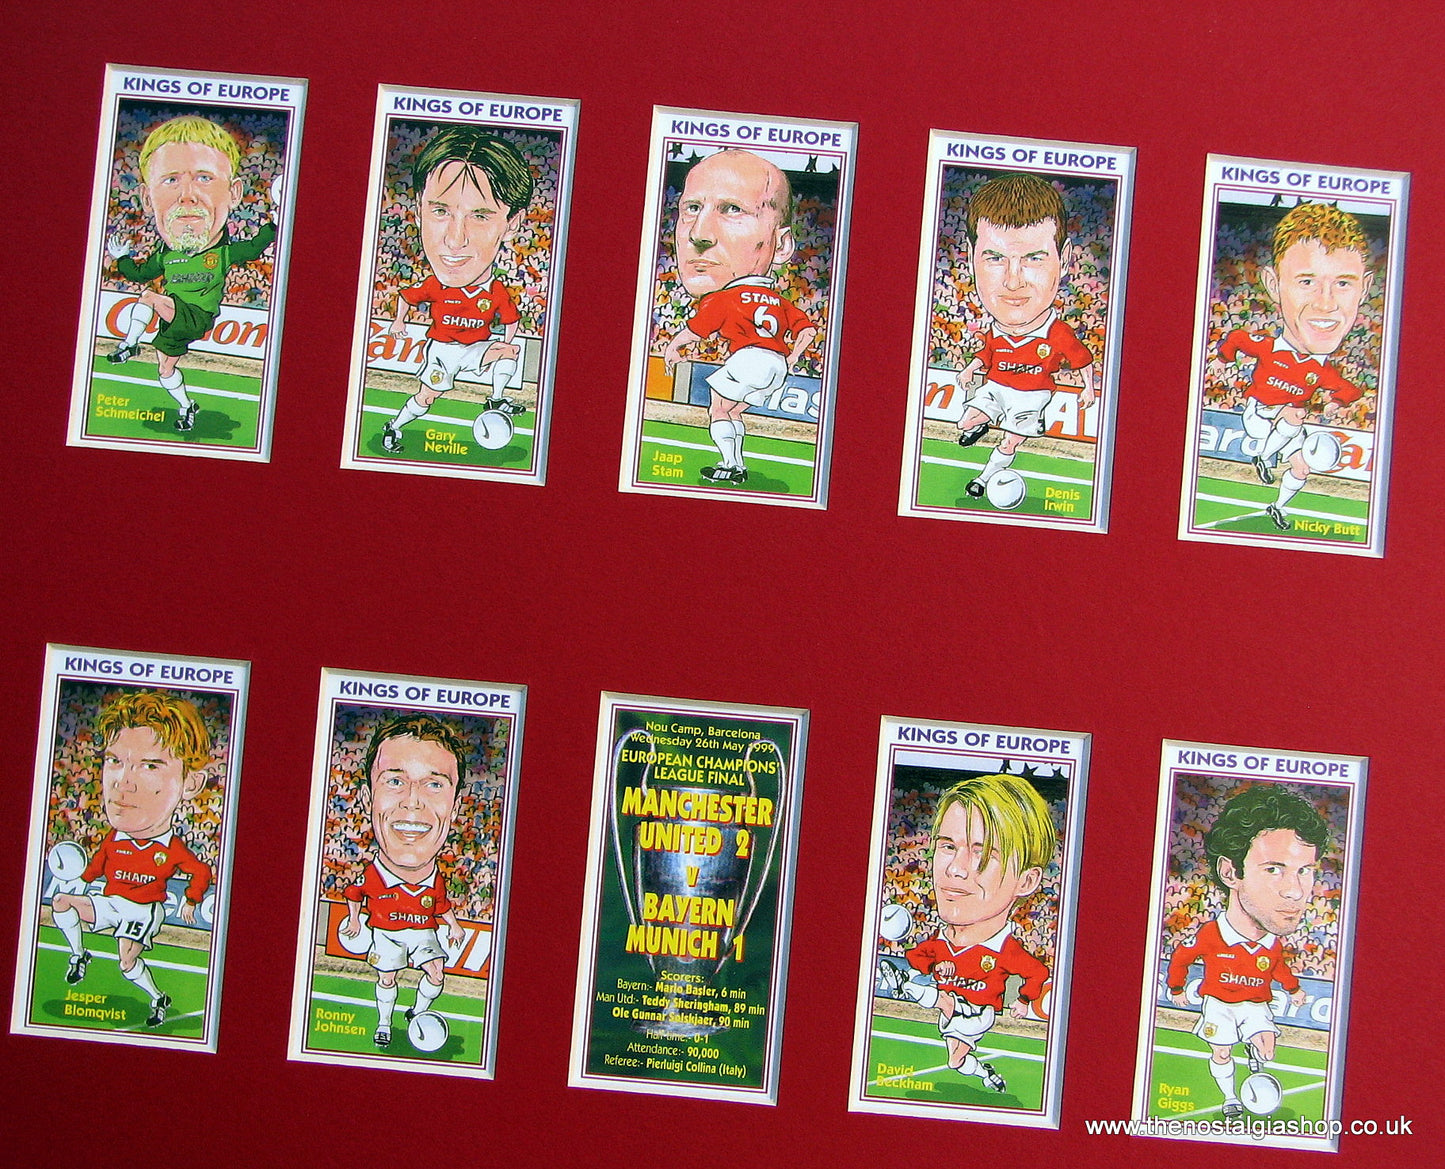 Manchester United 1999. Champions League Winners. Mounted Football Card Set.